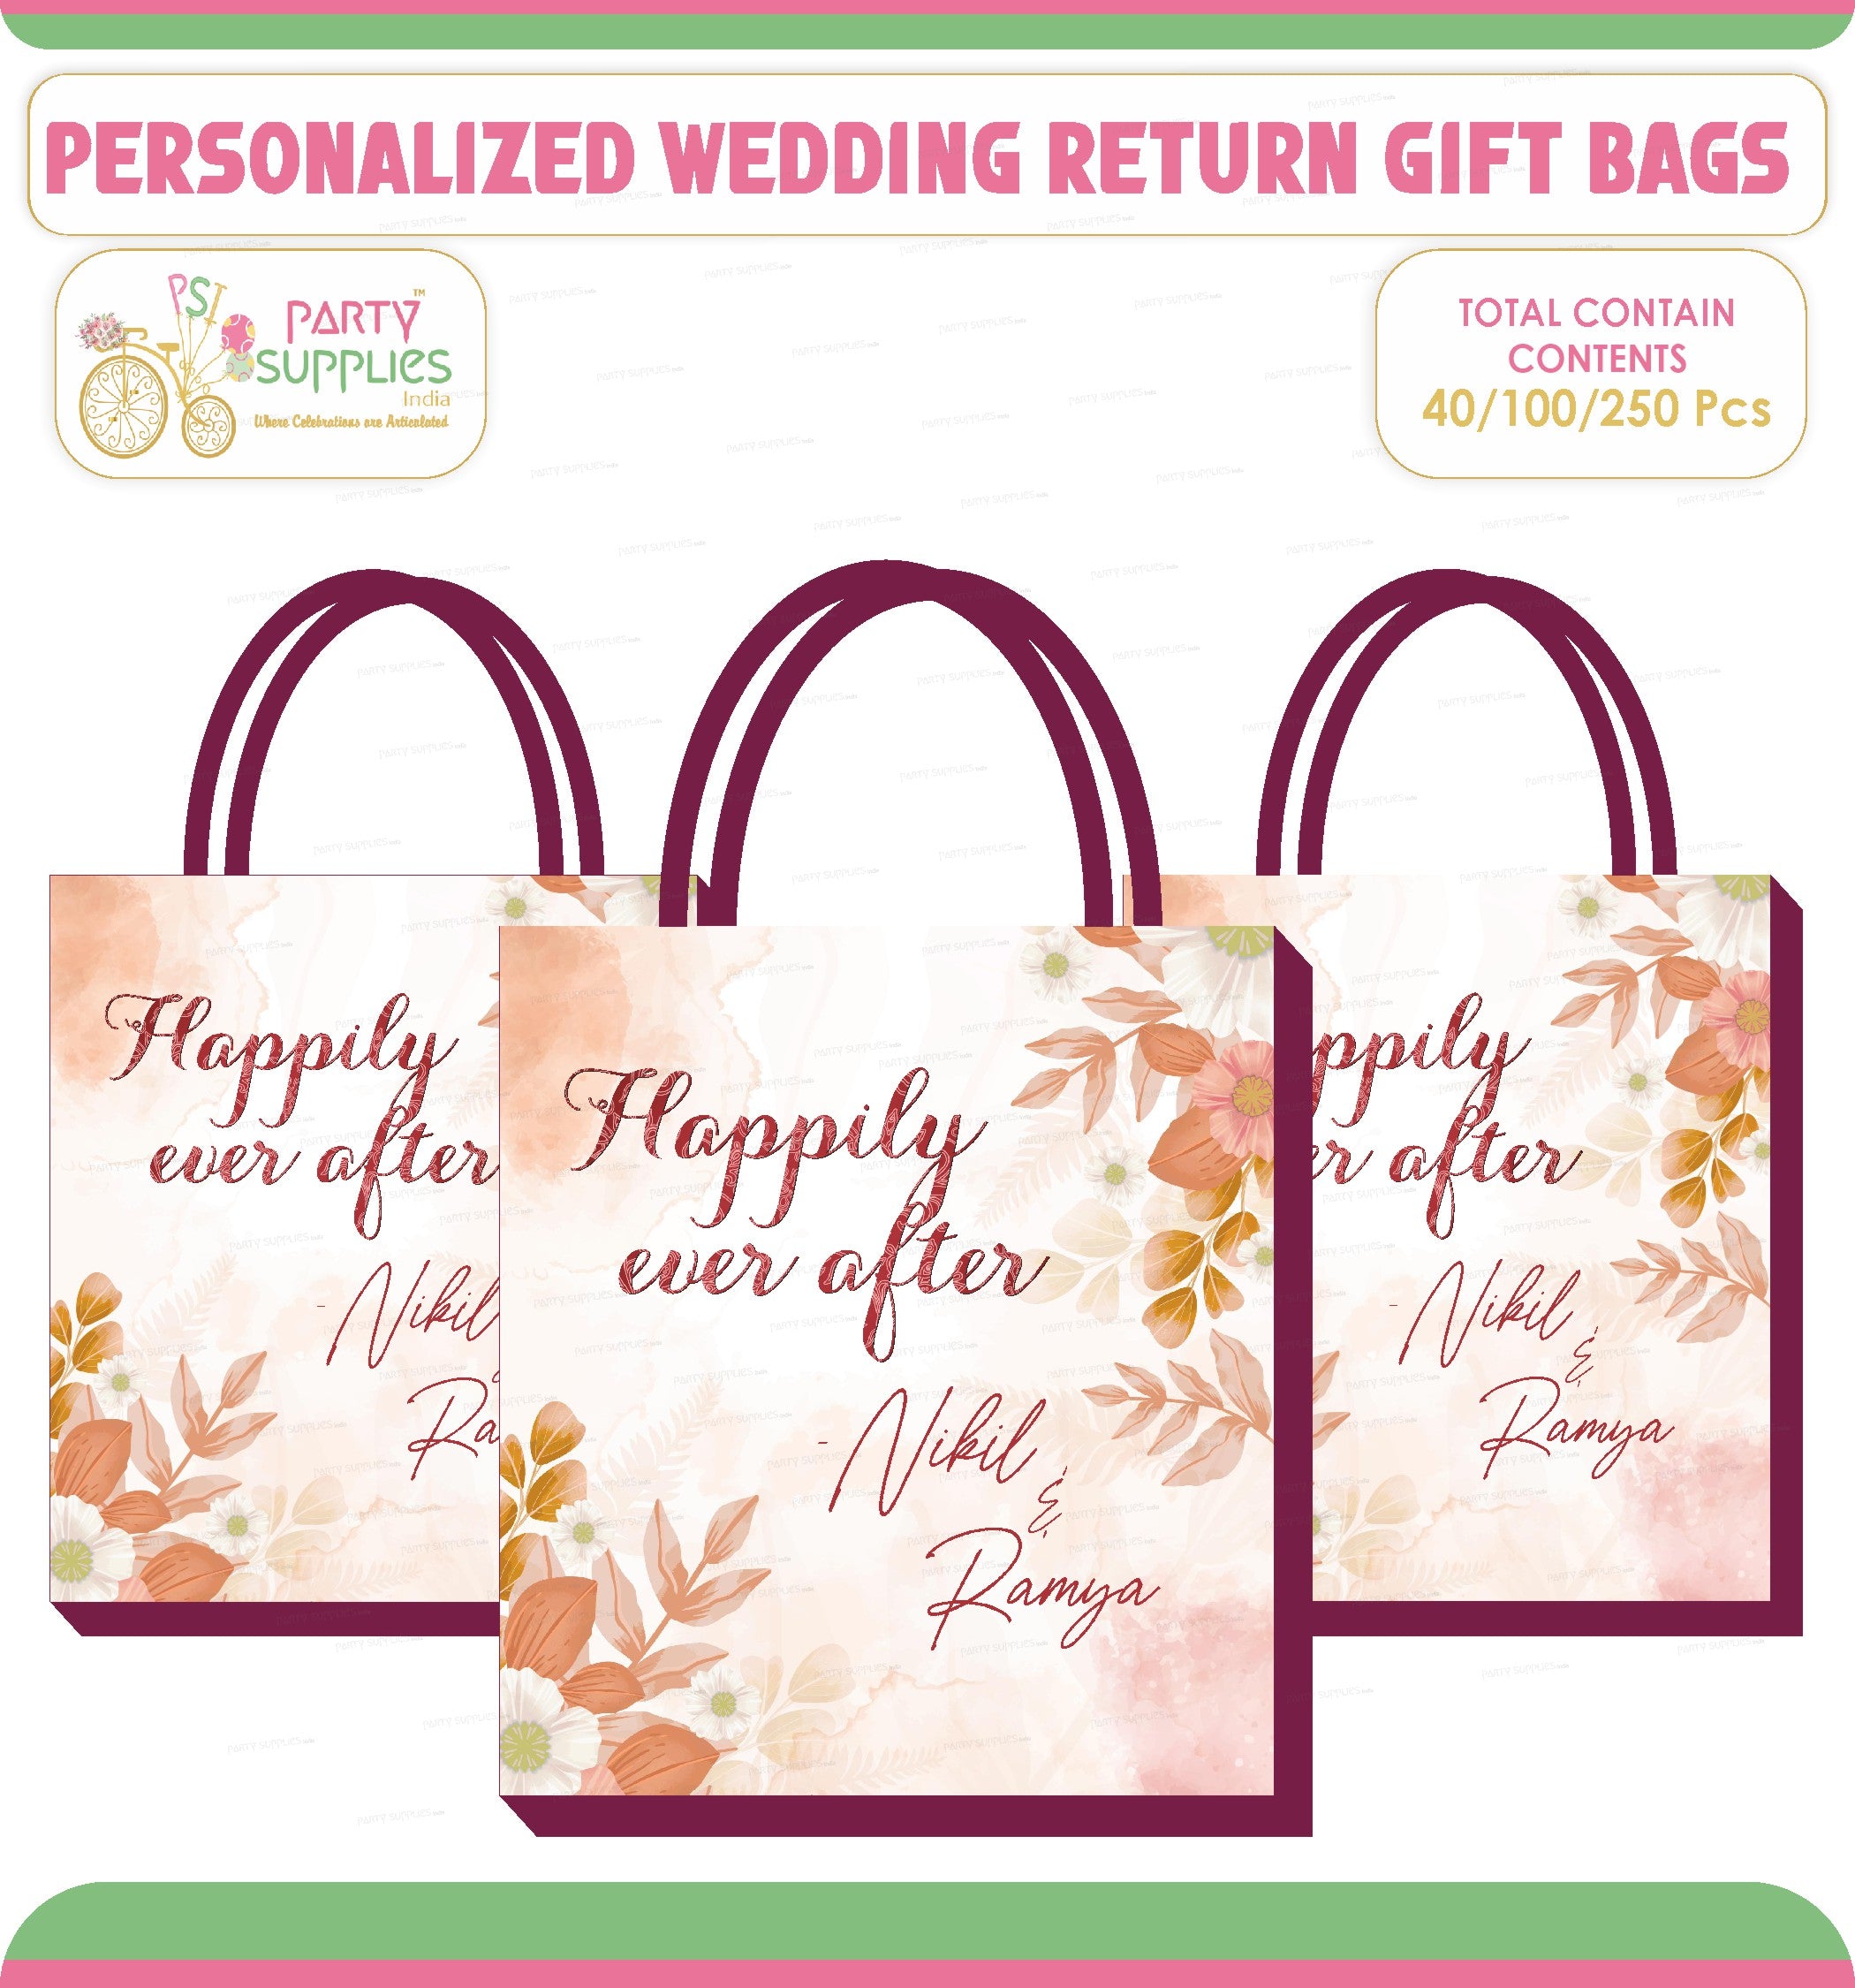 Personalized Return Gifts For Baby Shower by Rathore banna - Issuu